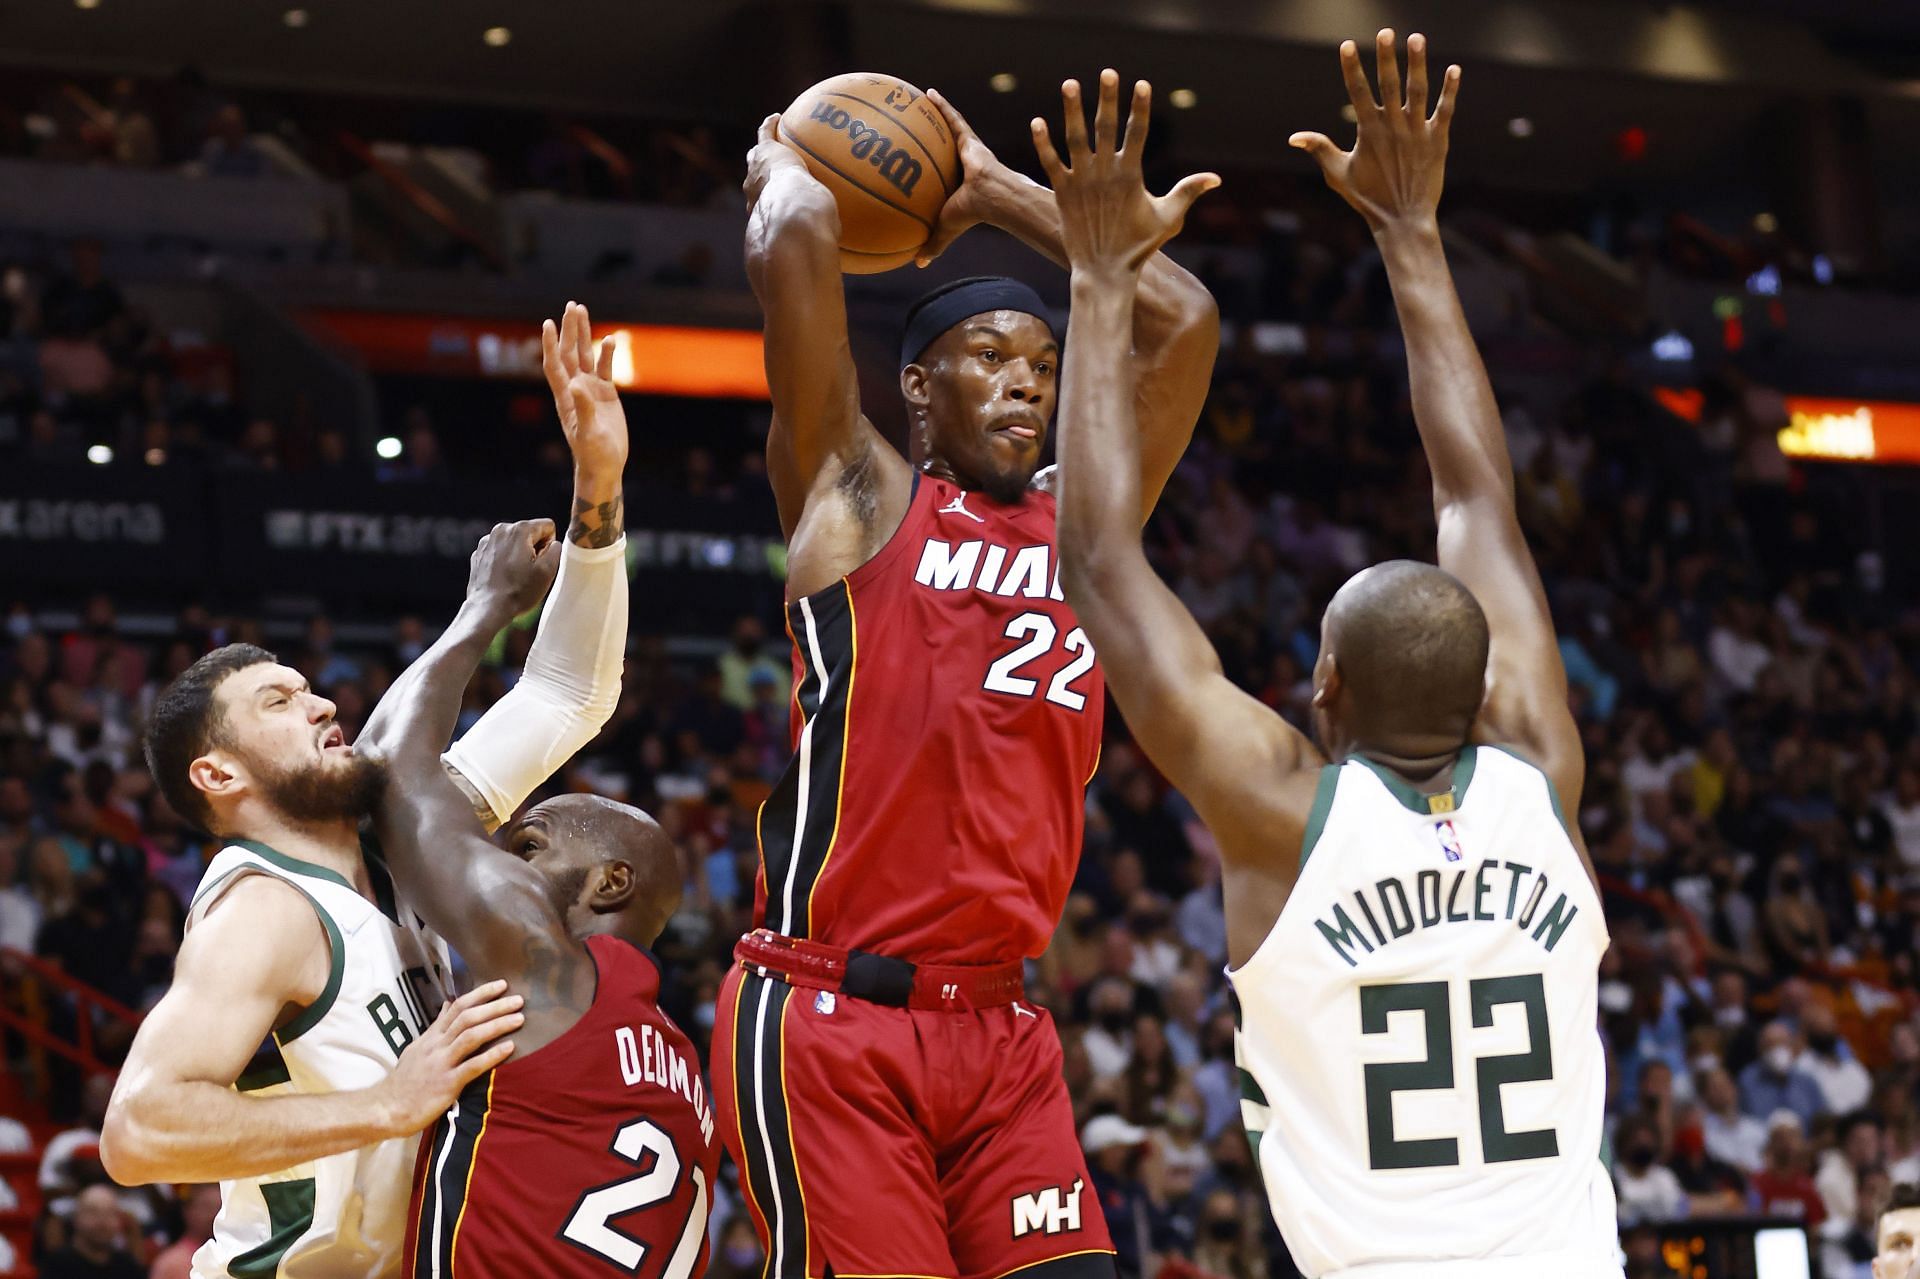 The Miami Heat and the Indiana Pacers will face off on Saturday